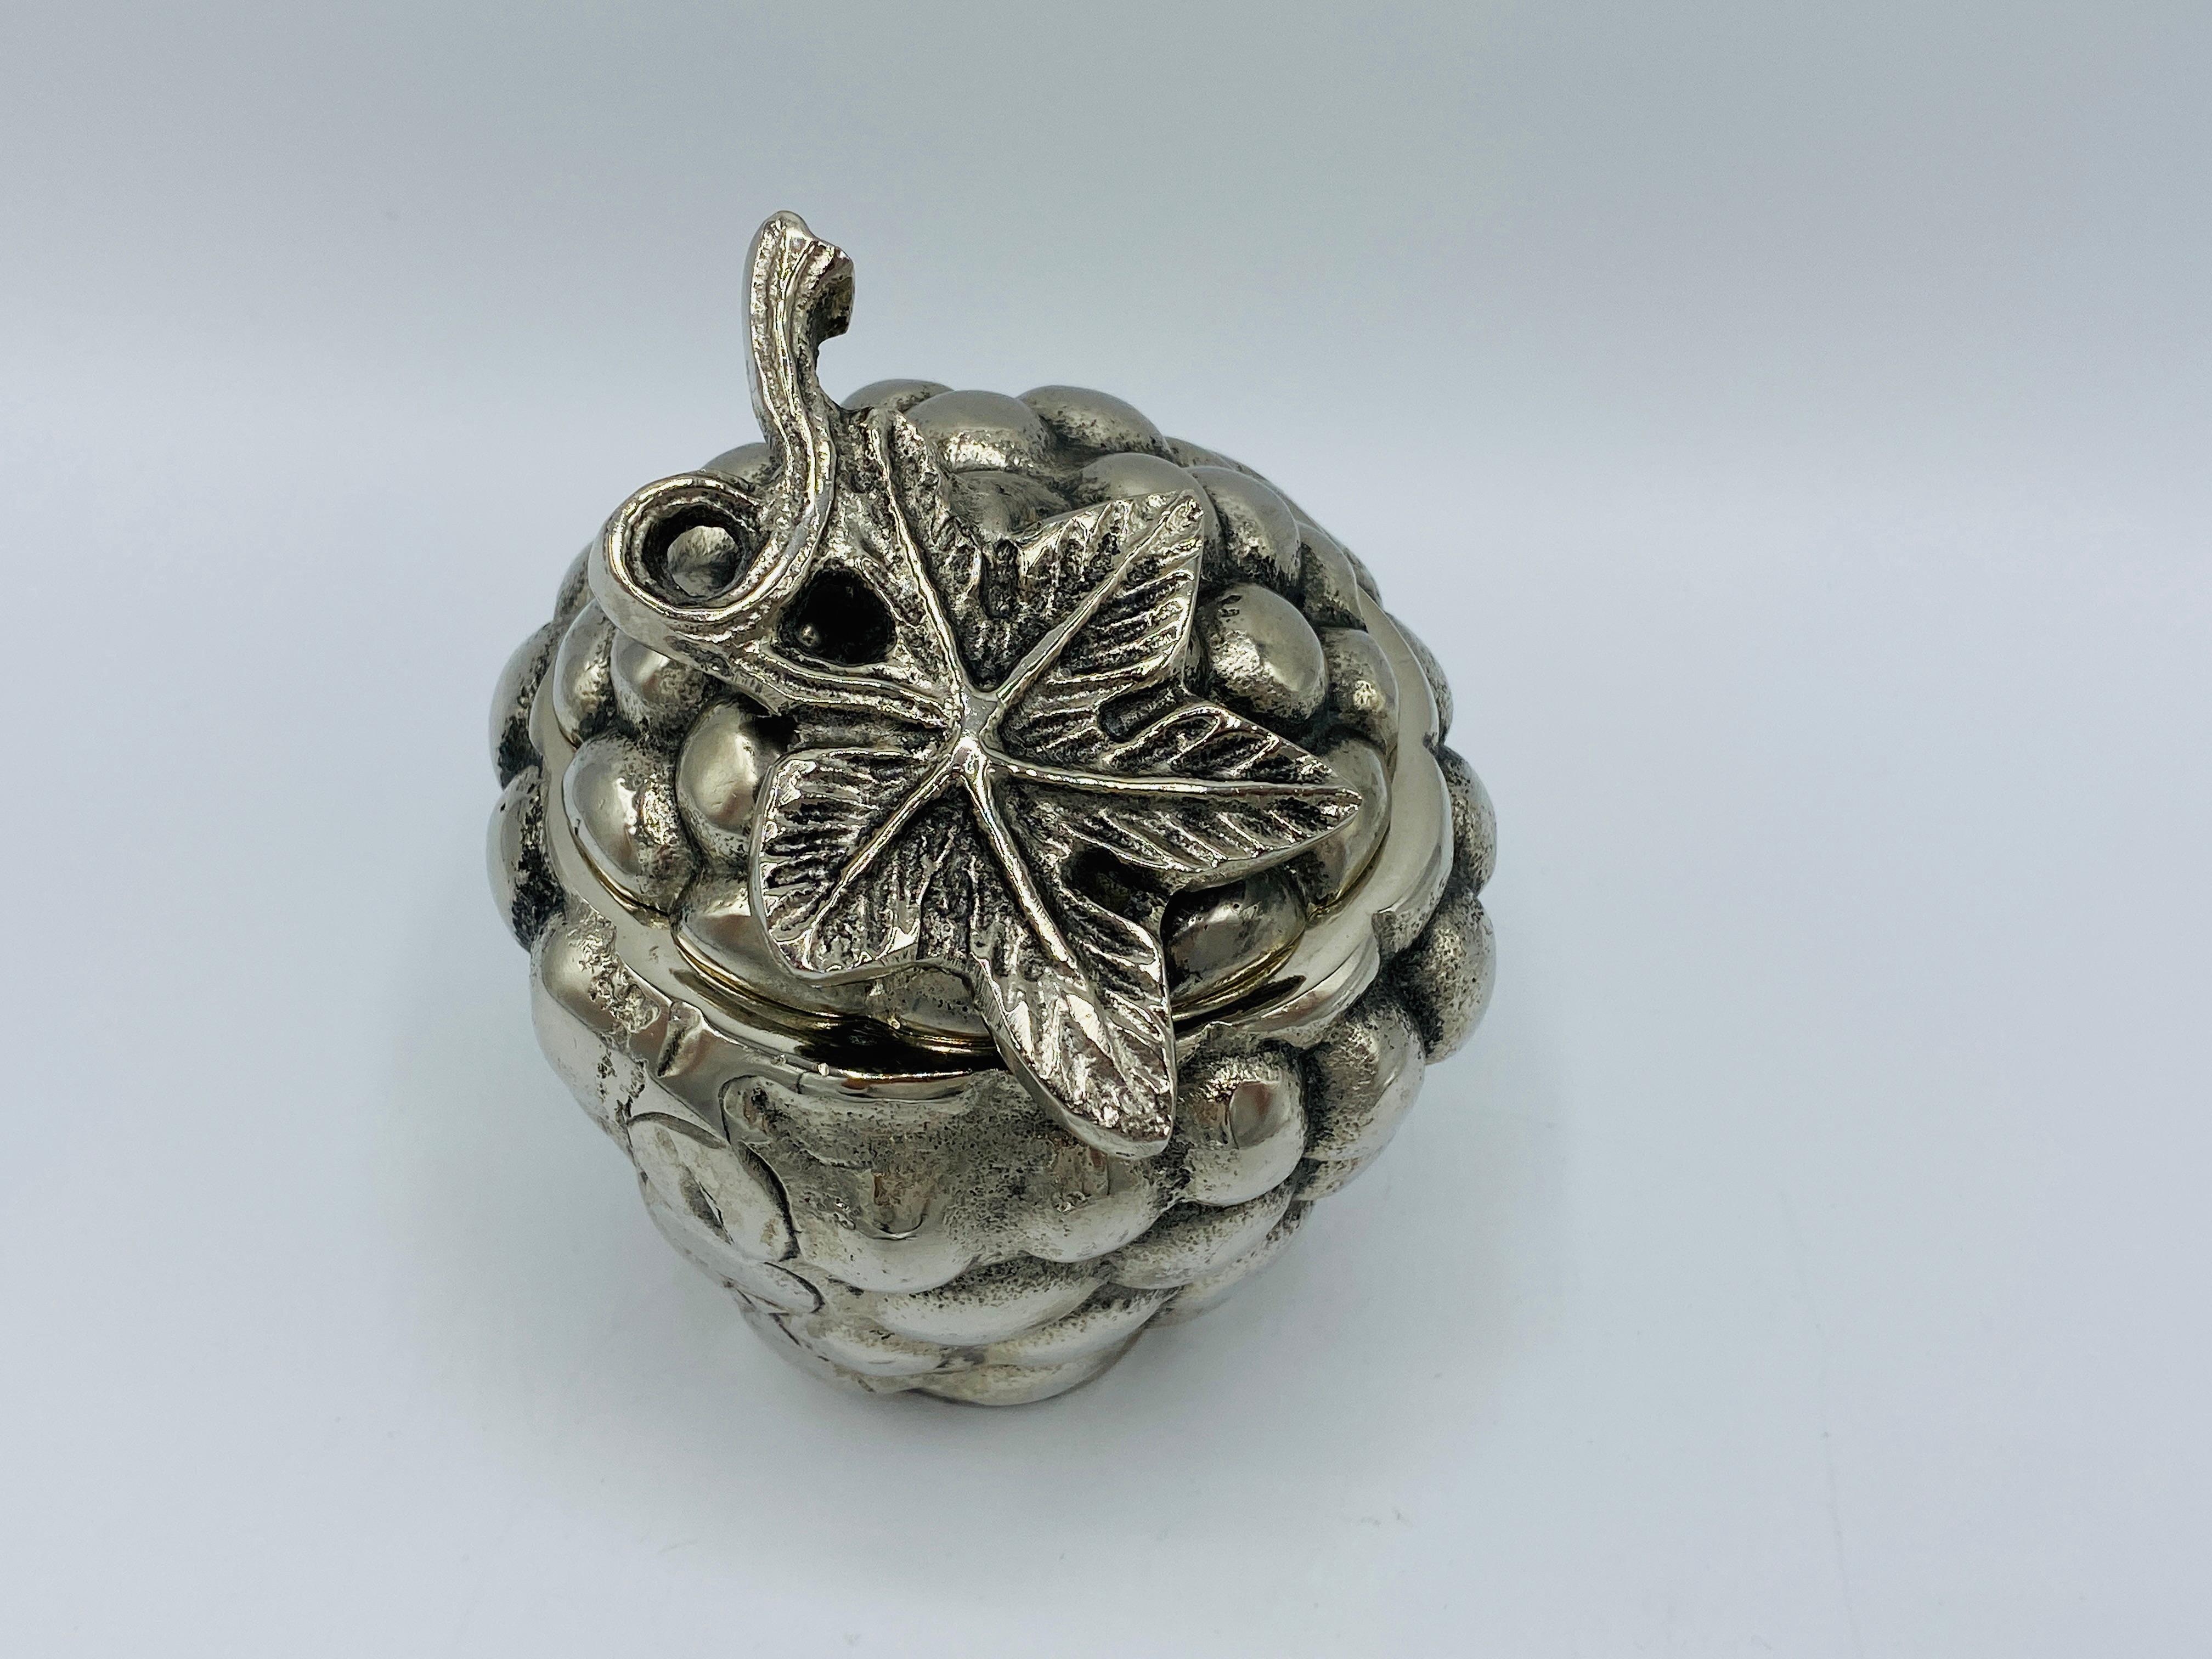 20th Century 1970s Mauro Manetti Style Silvered Metal Sculptural Grape Cluster Box For Sale